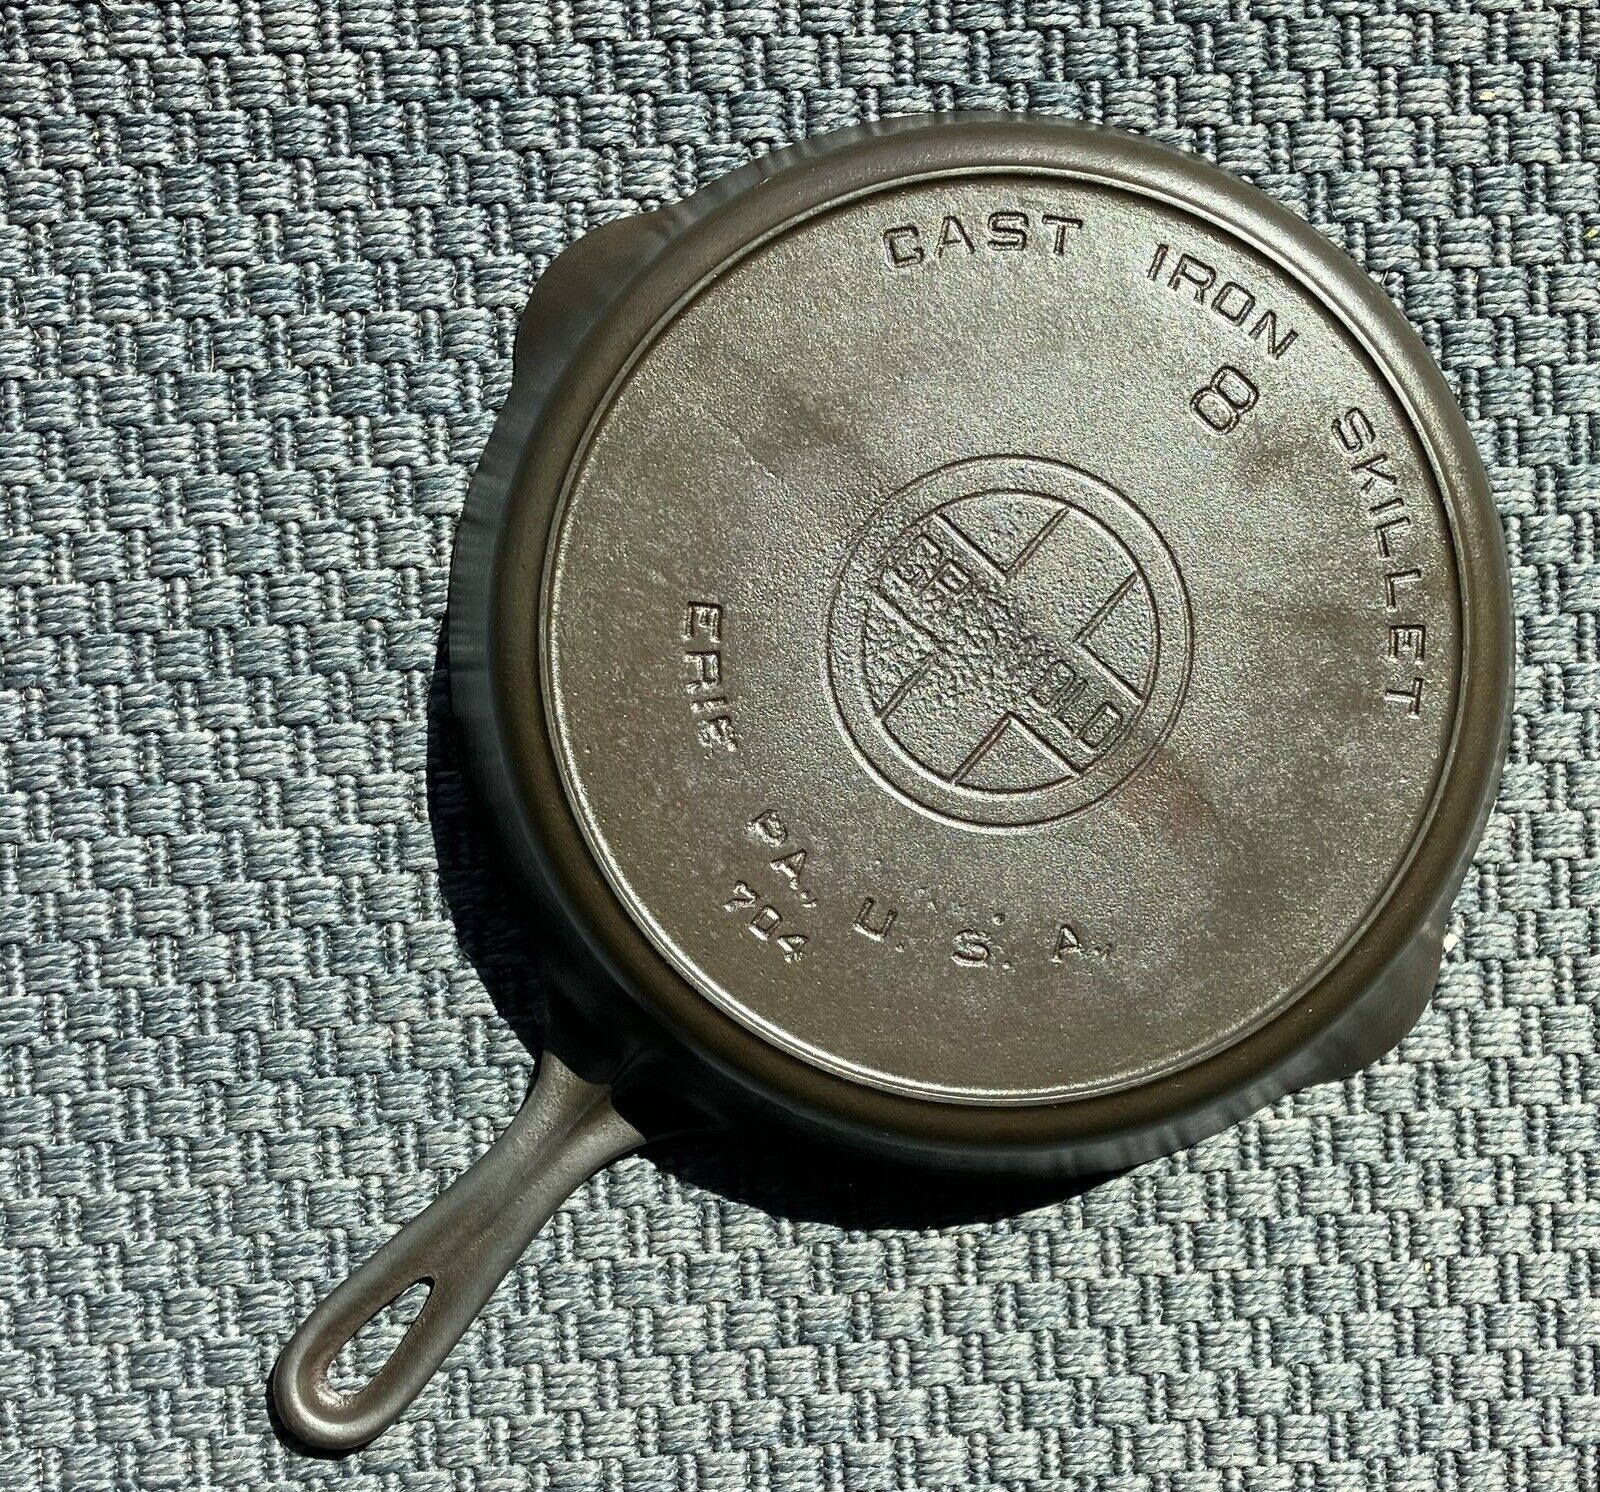 Vintage Griswold #8 cast iron skillet with heat ring. Cleaned and Seasoned.